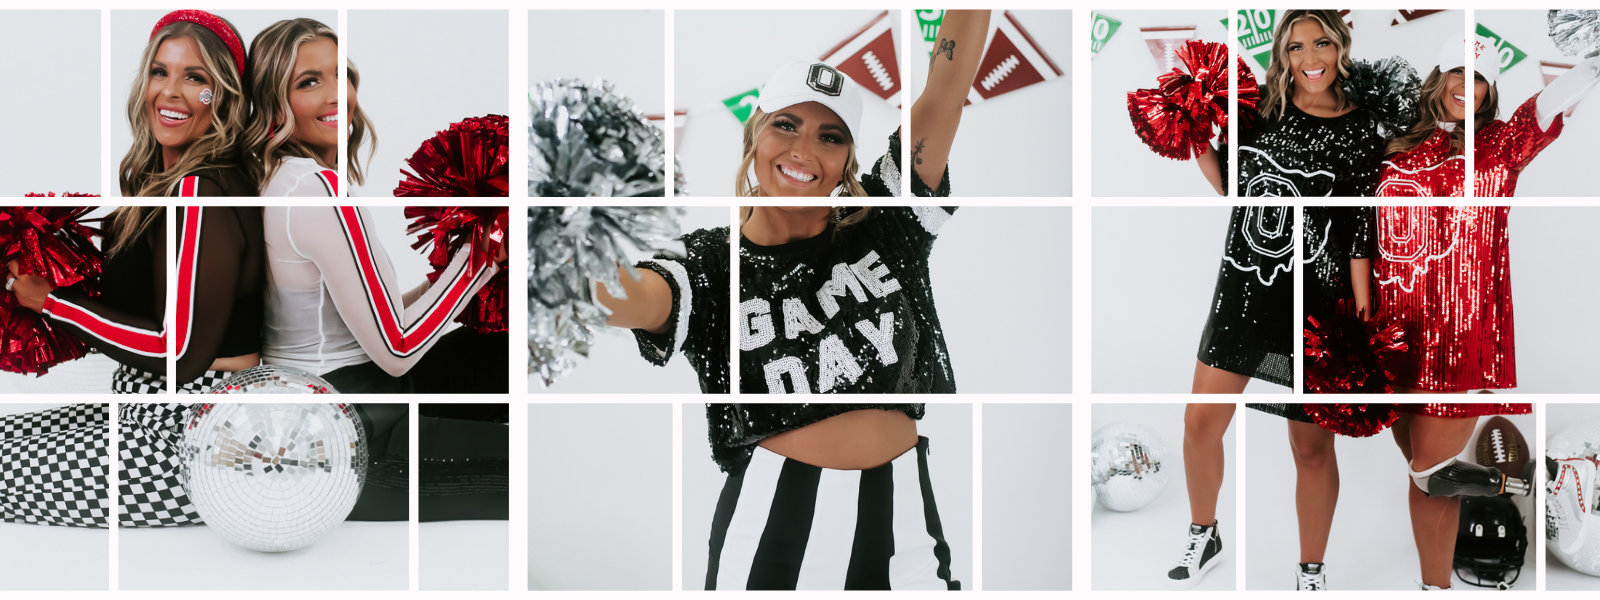 Elevate Your OSU Game Day with Stylish Outfit Inspo